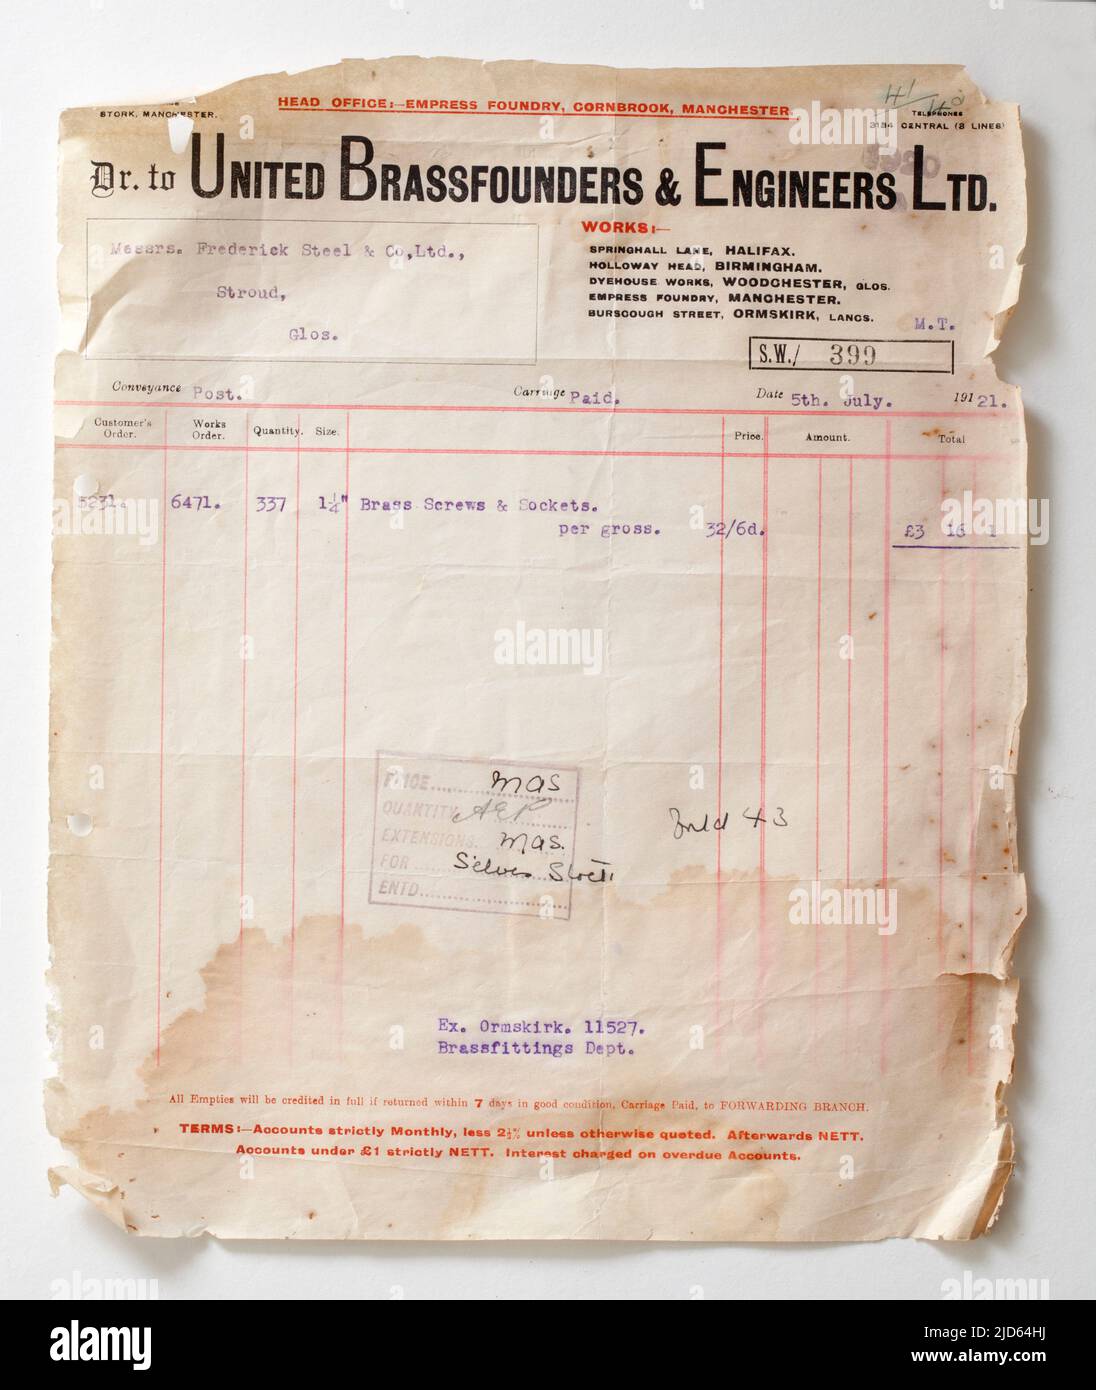 1921 Business Receipt for Brass Screws and Sockets from United Brassfounders & Engineers Stock Photo